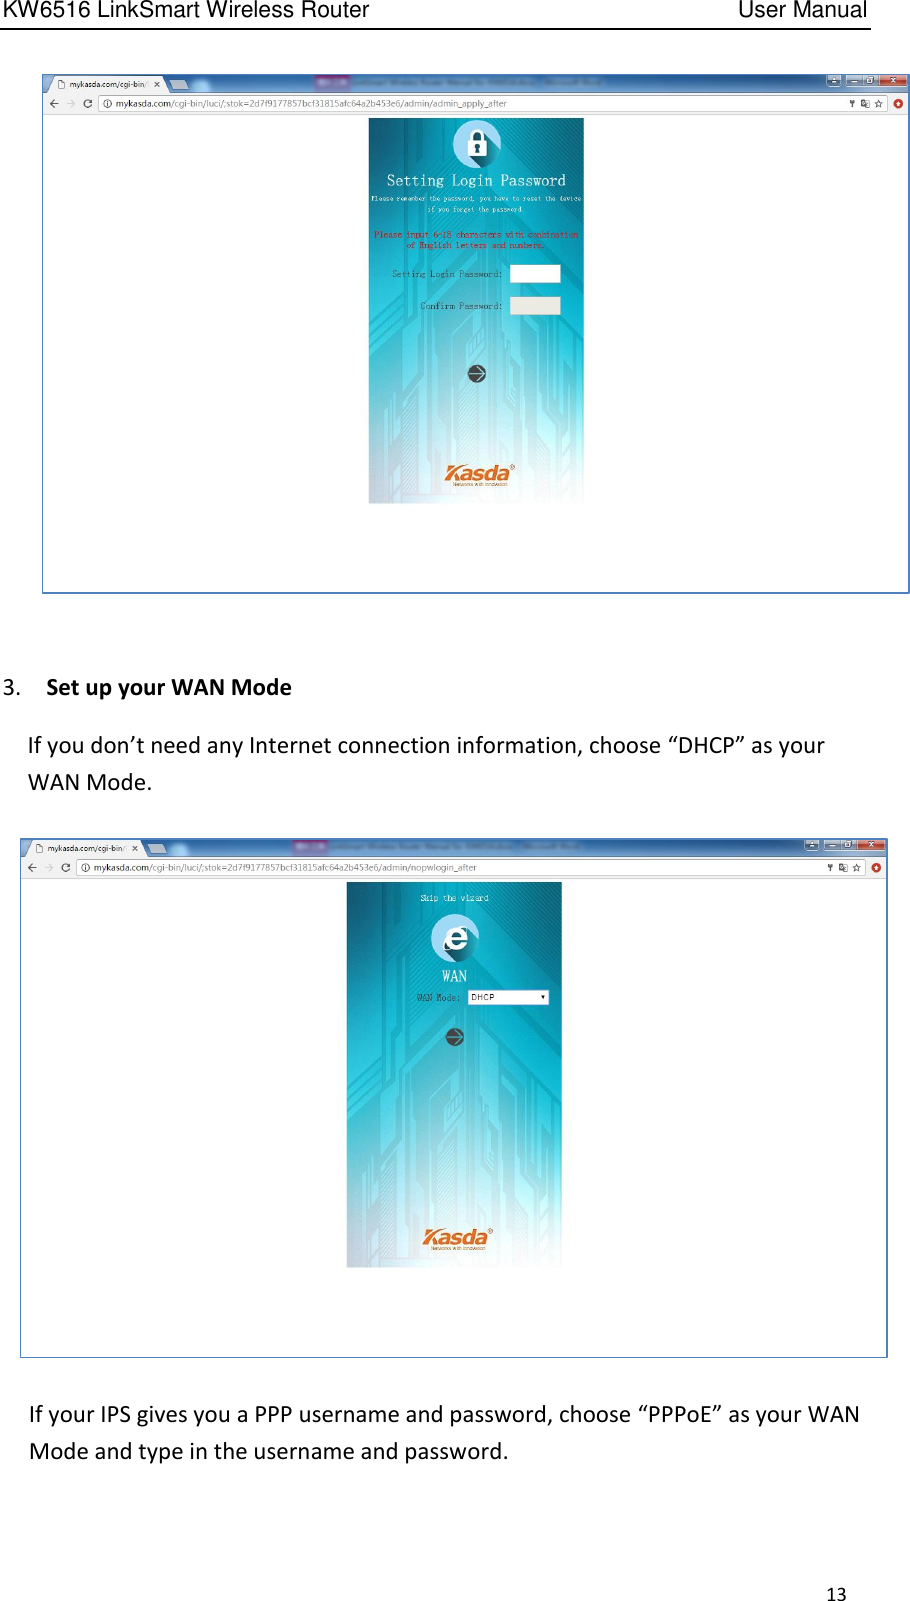 KW6516 LinkSmart Wireless Router         User Manual 13   3.    Set up your WAN Mode   If you don’t need any Internet connection information, choose “DHCP” as your WAN Mode.  If your IPS gives you a PPP username and password, choose “PPPoE” as your WAN Mode and type in the username and password. 